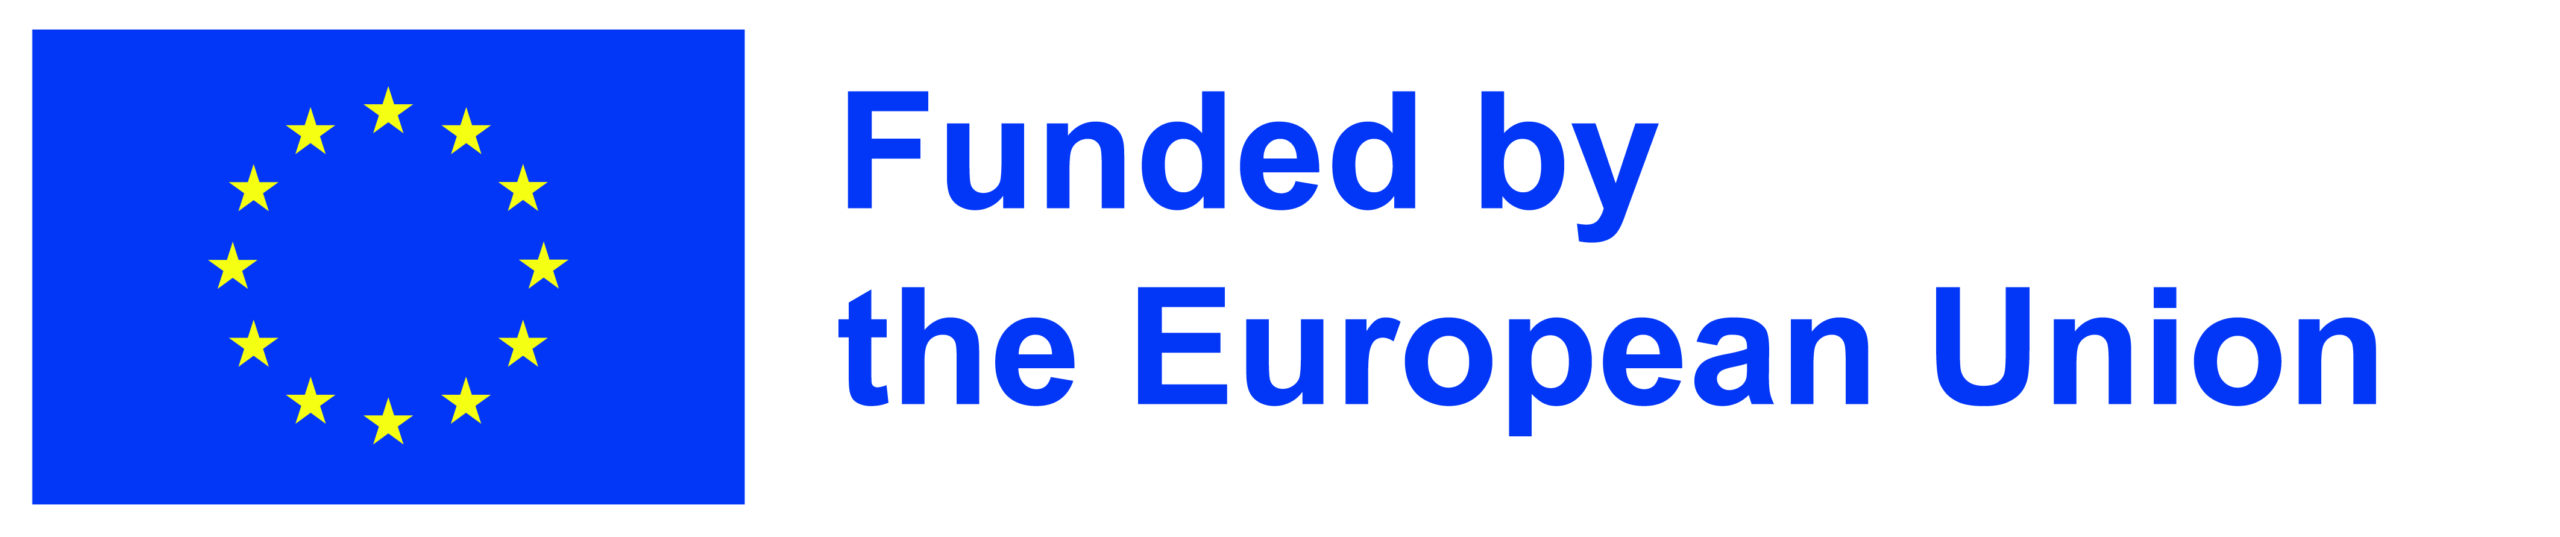 This project has received funding from the European Union’s Horizon Europe research and innovation funding programme under Grant Agreement No 101091668. Subvención total: 14 292 022,25 euros. Subvención para ITENE: 492 812,50 euros.